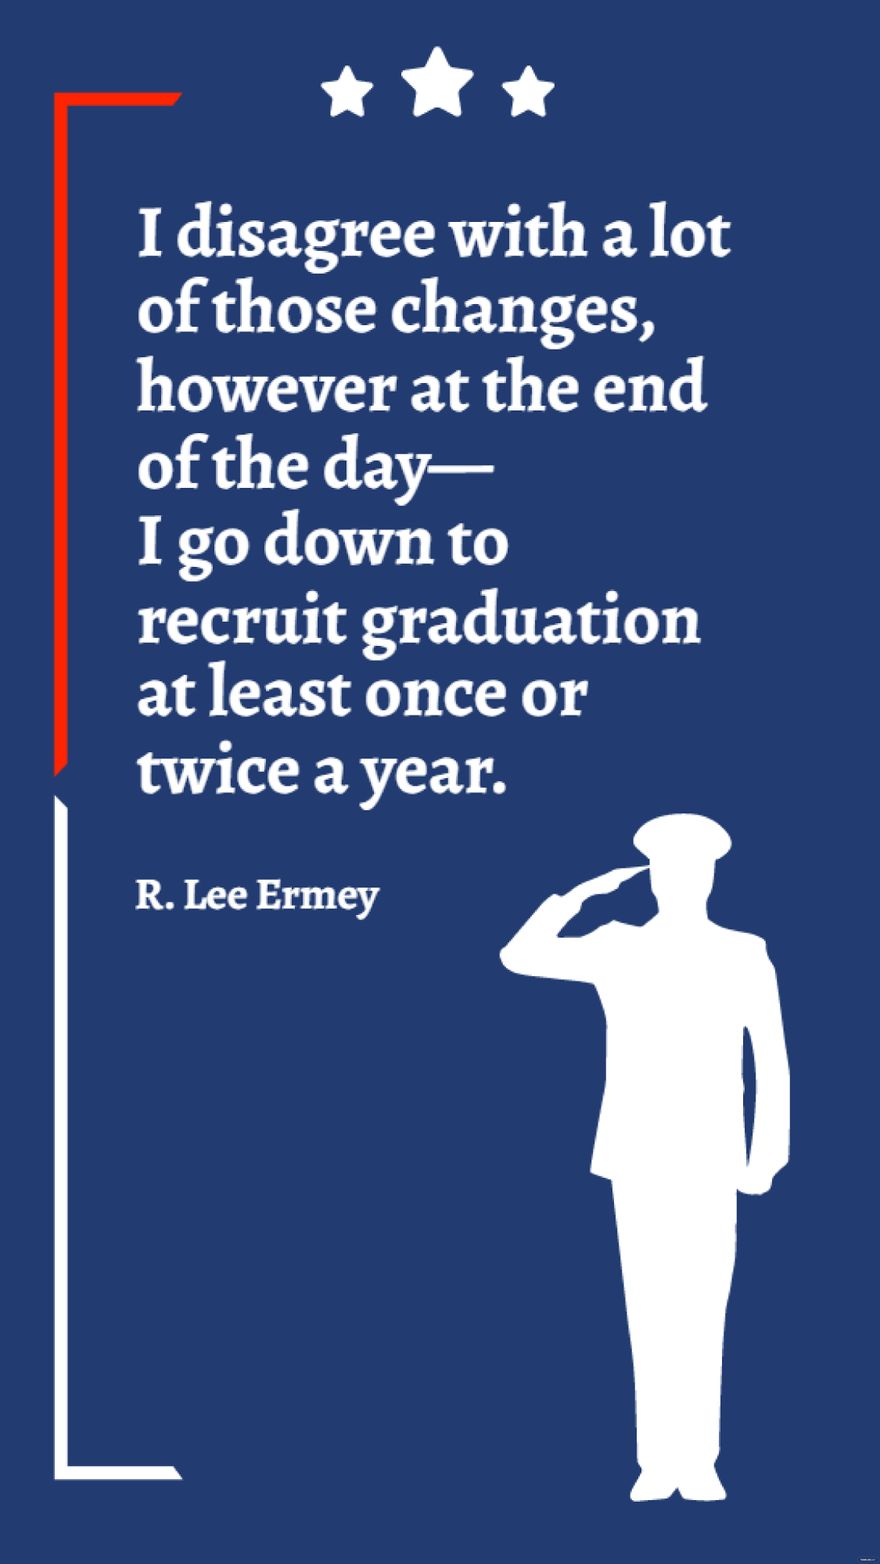 Free R. Lee Ermey - I disagree with a lot of those changes, however at the end of the day - I go down to recruit graduation at least once or twice a year. in JPG